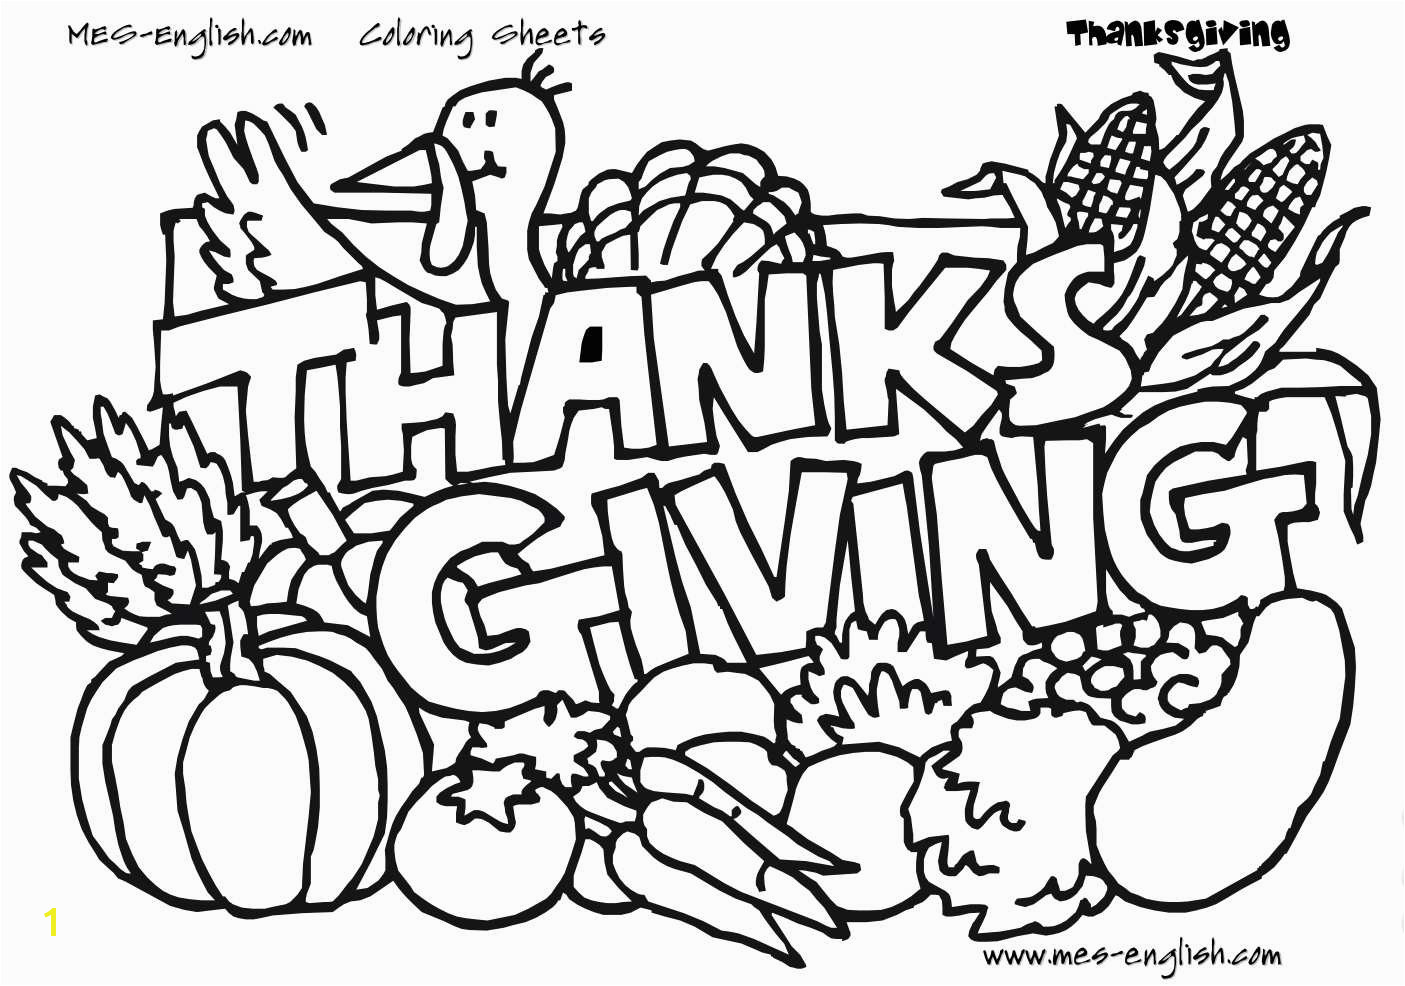 Unique Thanksgiving Coloring Pages A turkey and ve ables with the phrase "Thanksgiving "